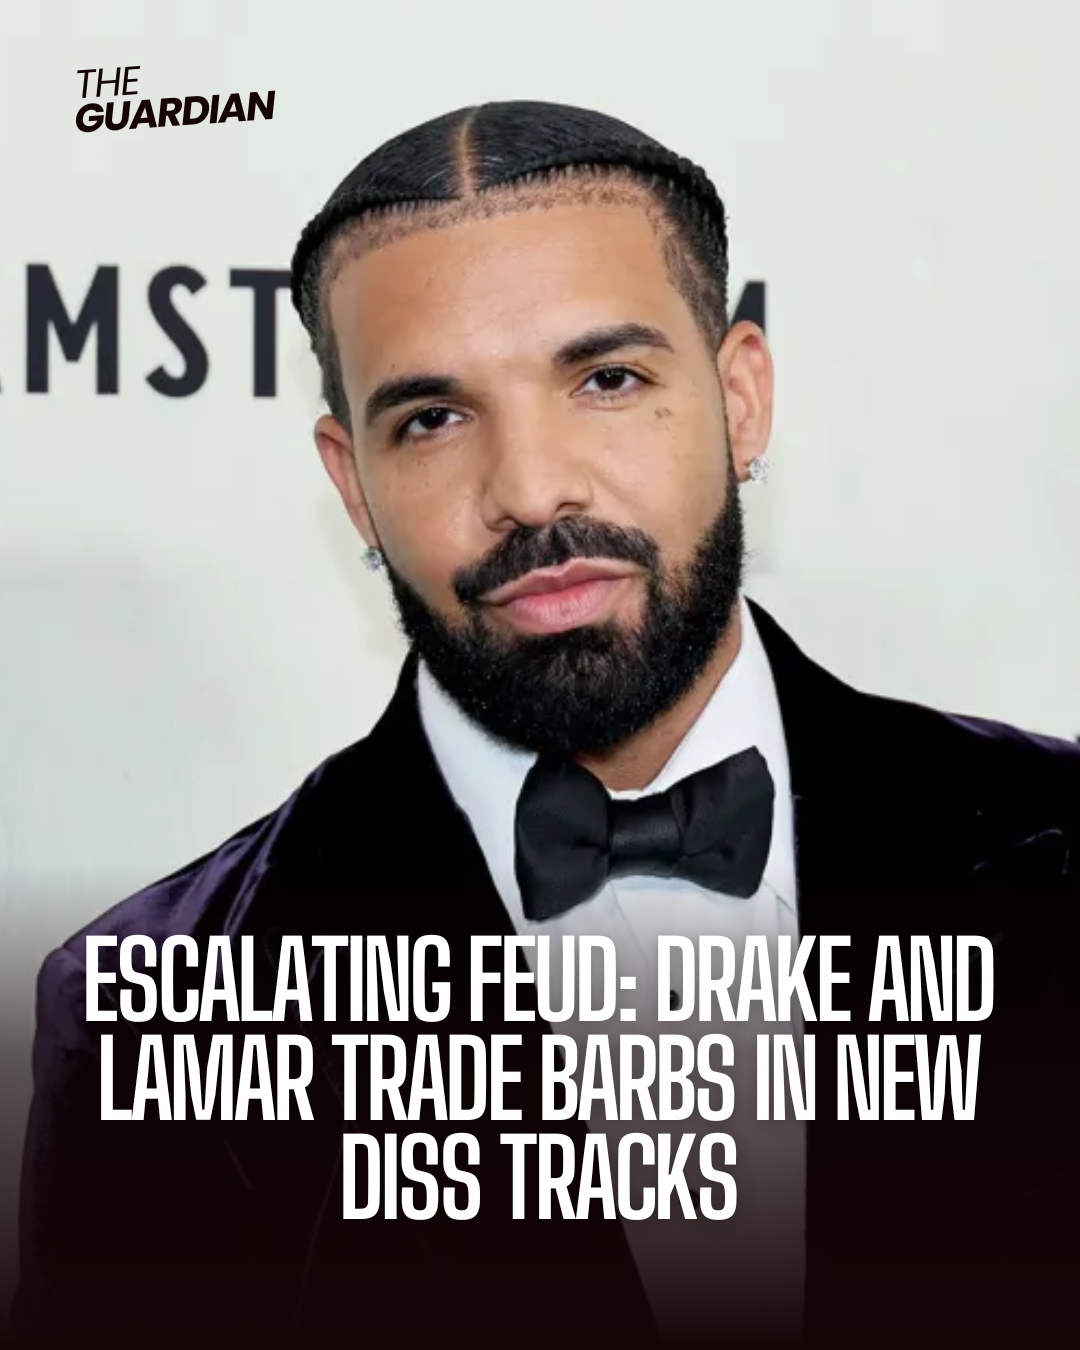 Drake has refused allegations of having relationships with underage females and of having a secret love child, which was raised in a diss track by his foe Kendrick Lamar.